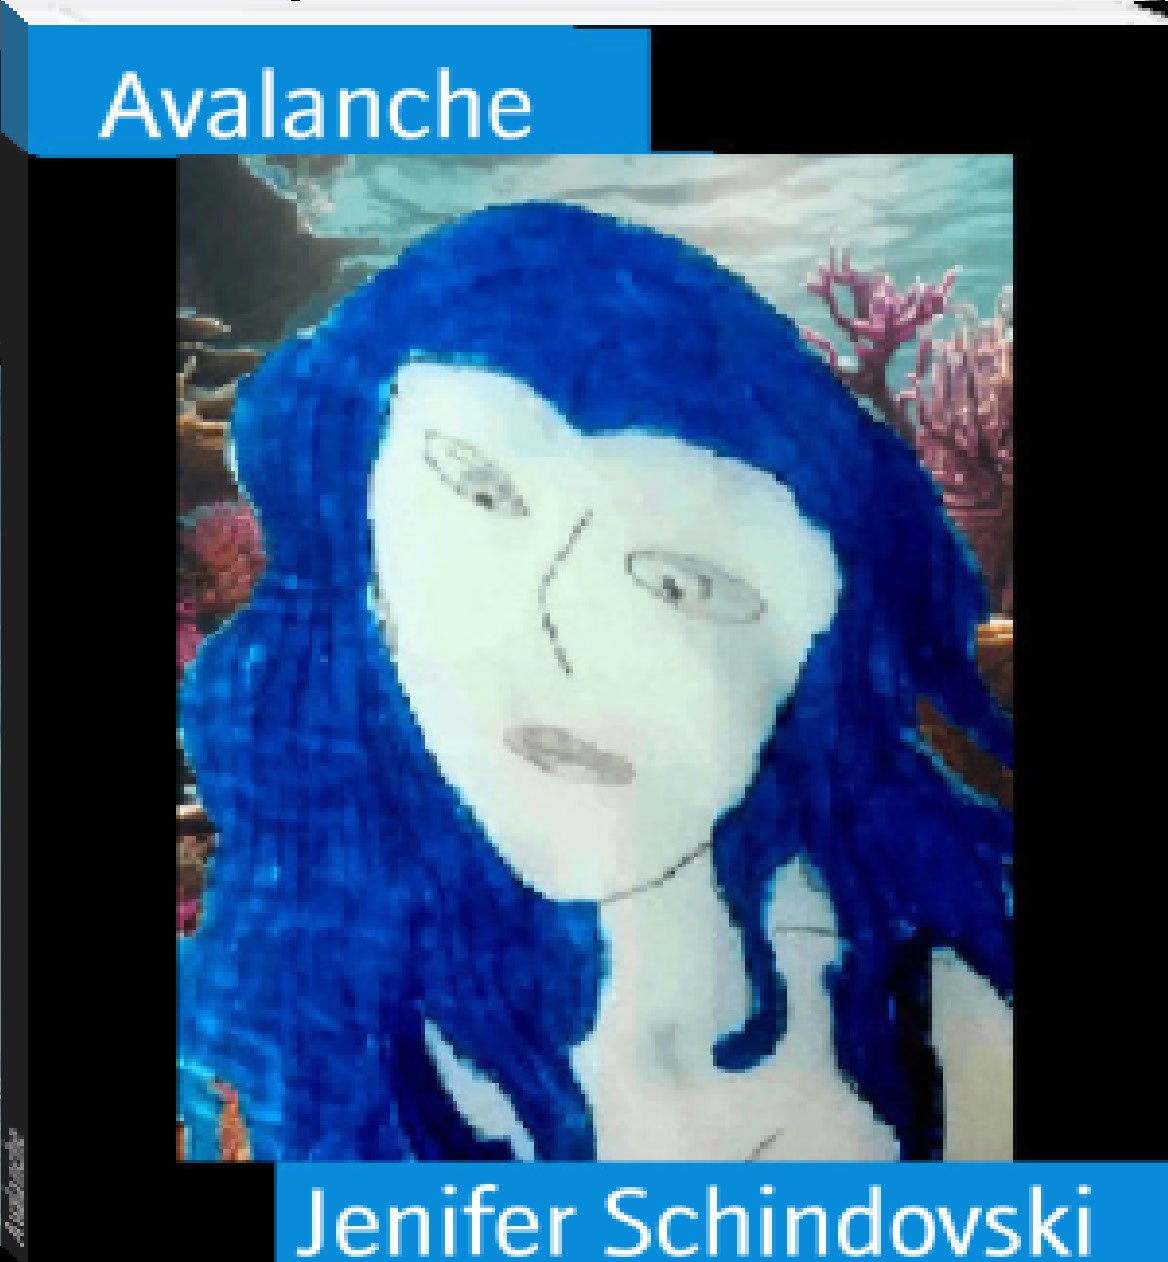 Avalanche rendition image